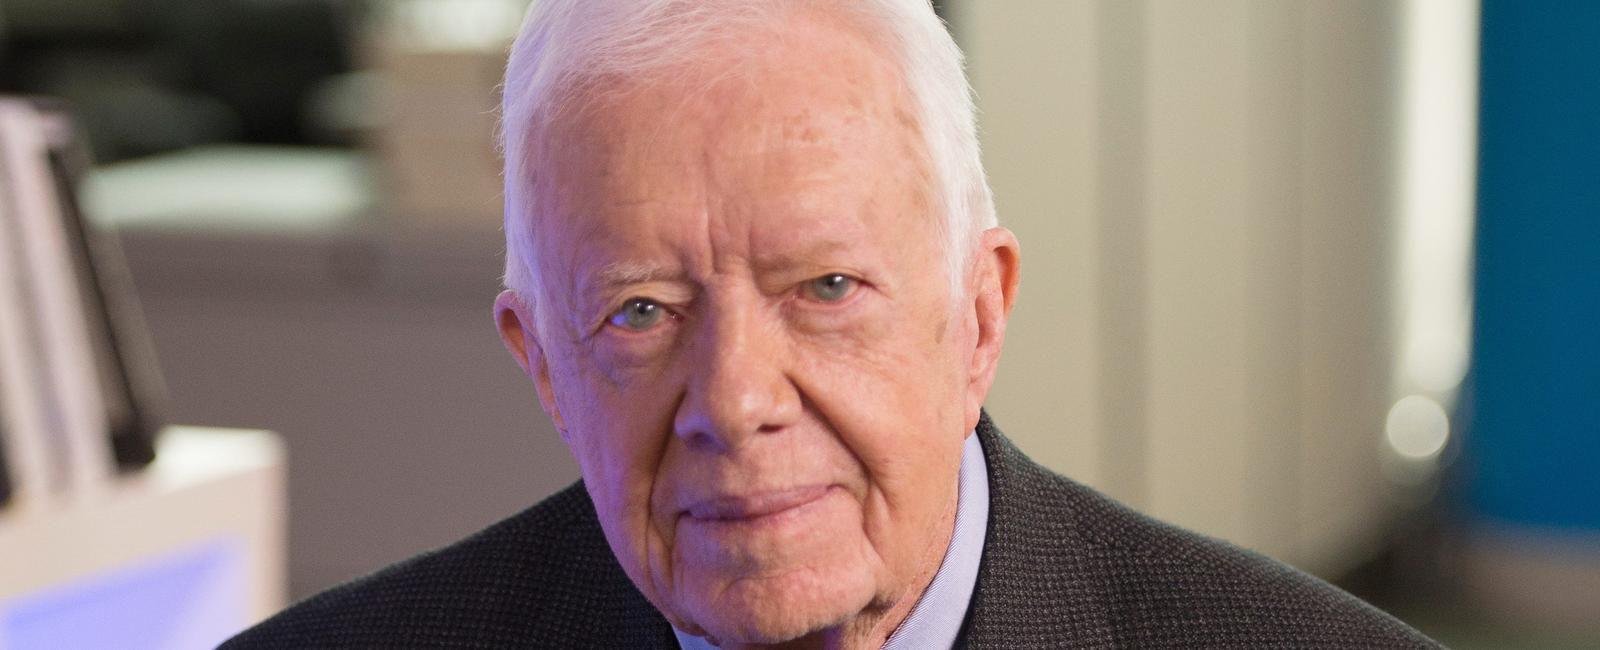 Jimmy carter once left nuclear launch codes in his dry cleaning